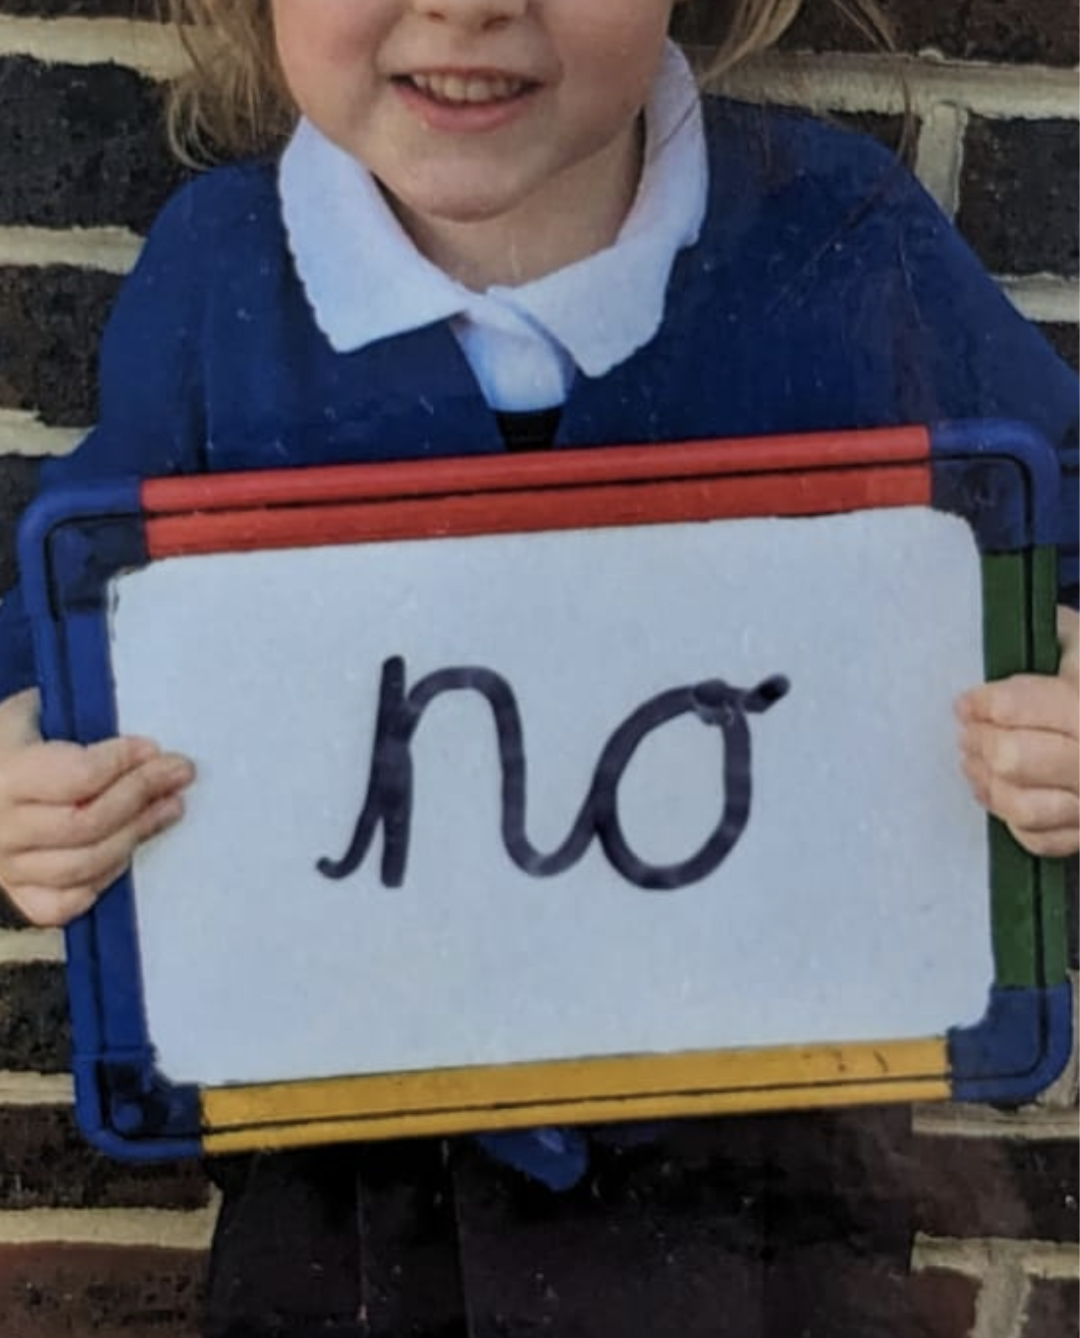 Hayley's five-year-old daughter proudly holds a sign that bears the word 'no' in her own handwriting. She is wearing a school uniform and stood against a brick wall. Her face isn't visible but her broad grin is.